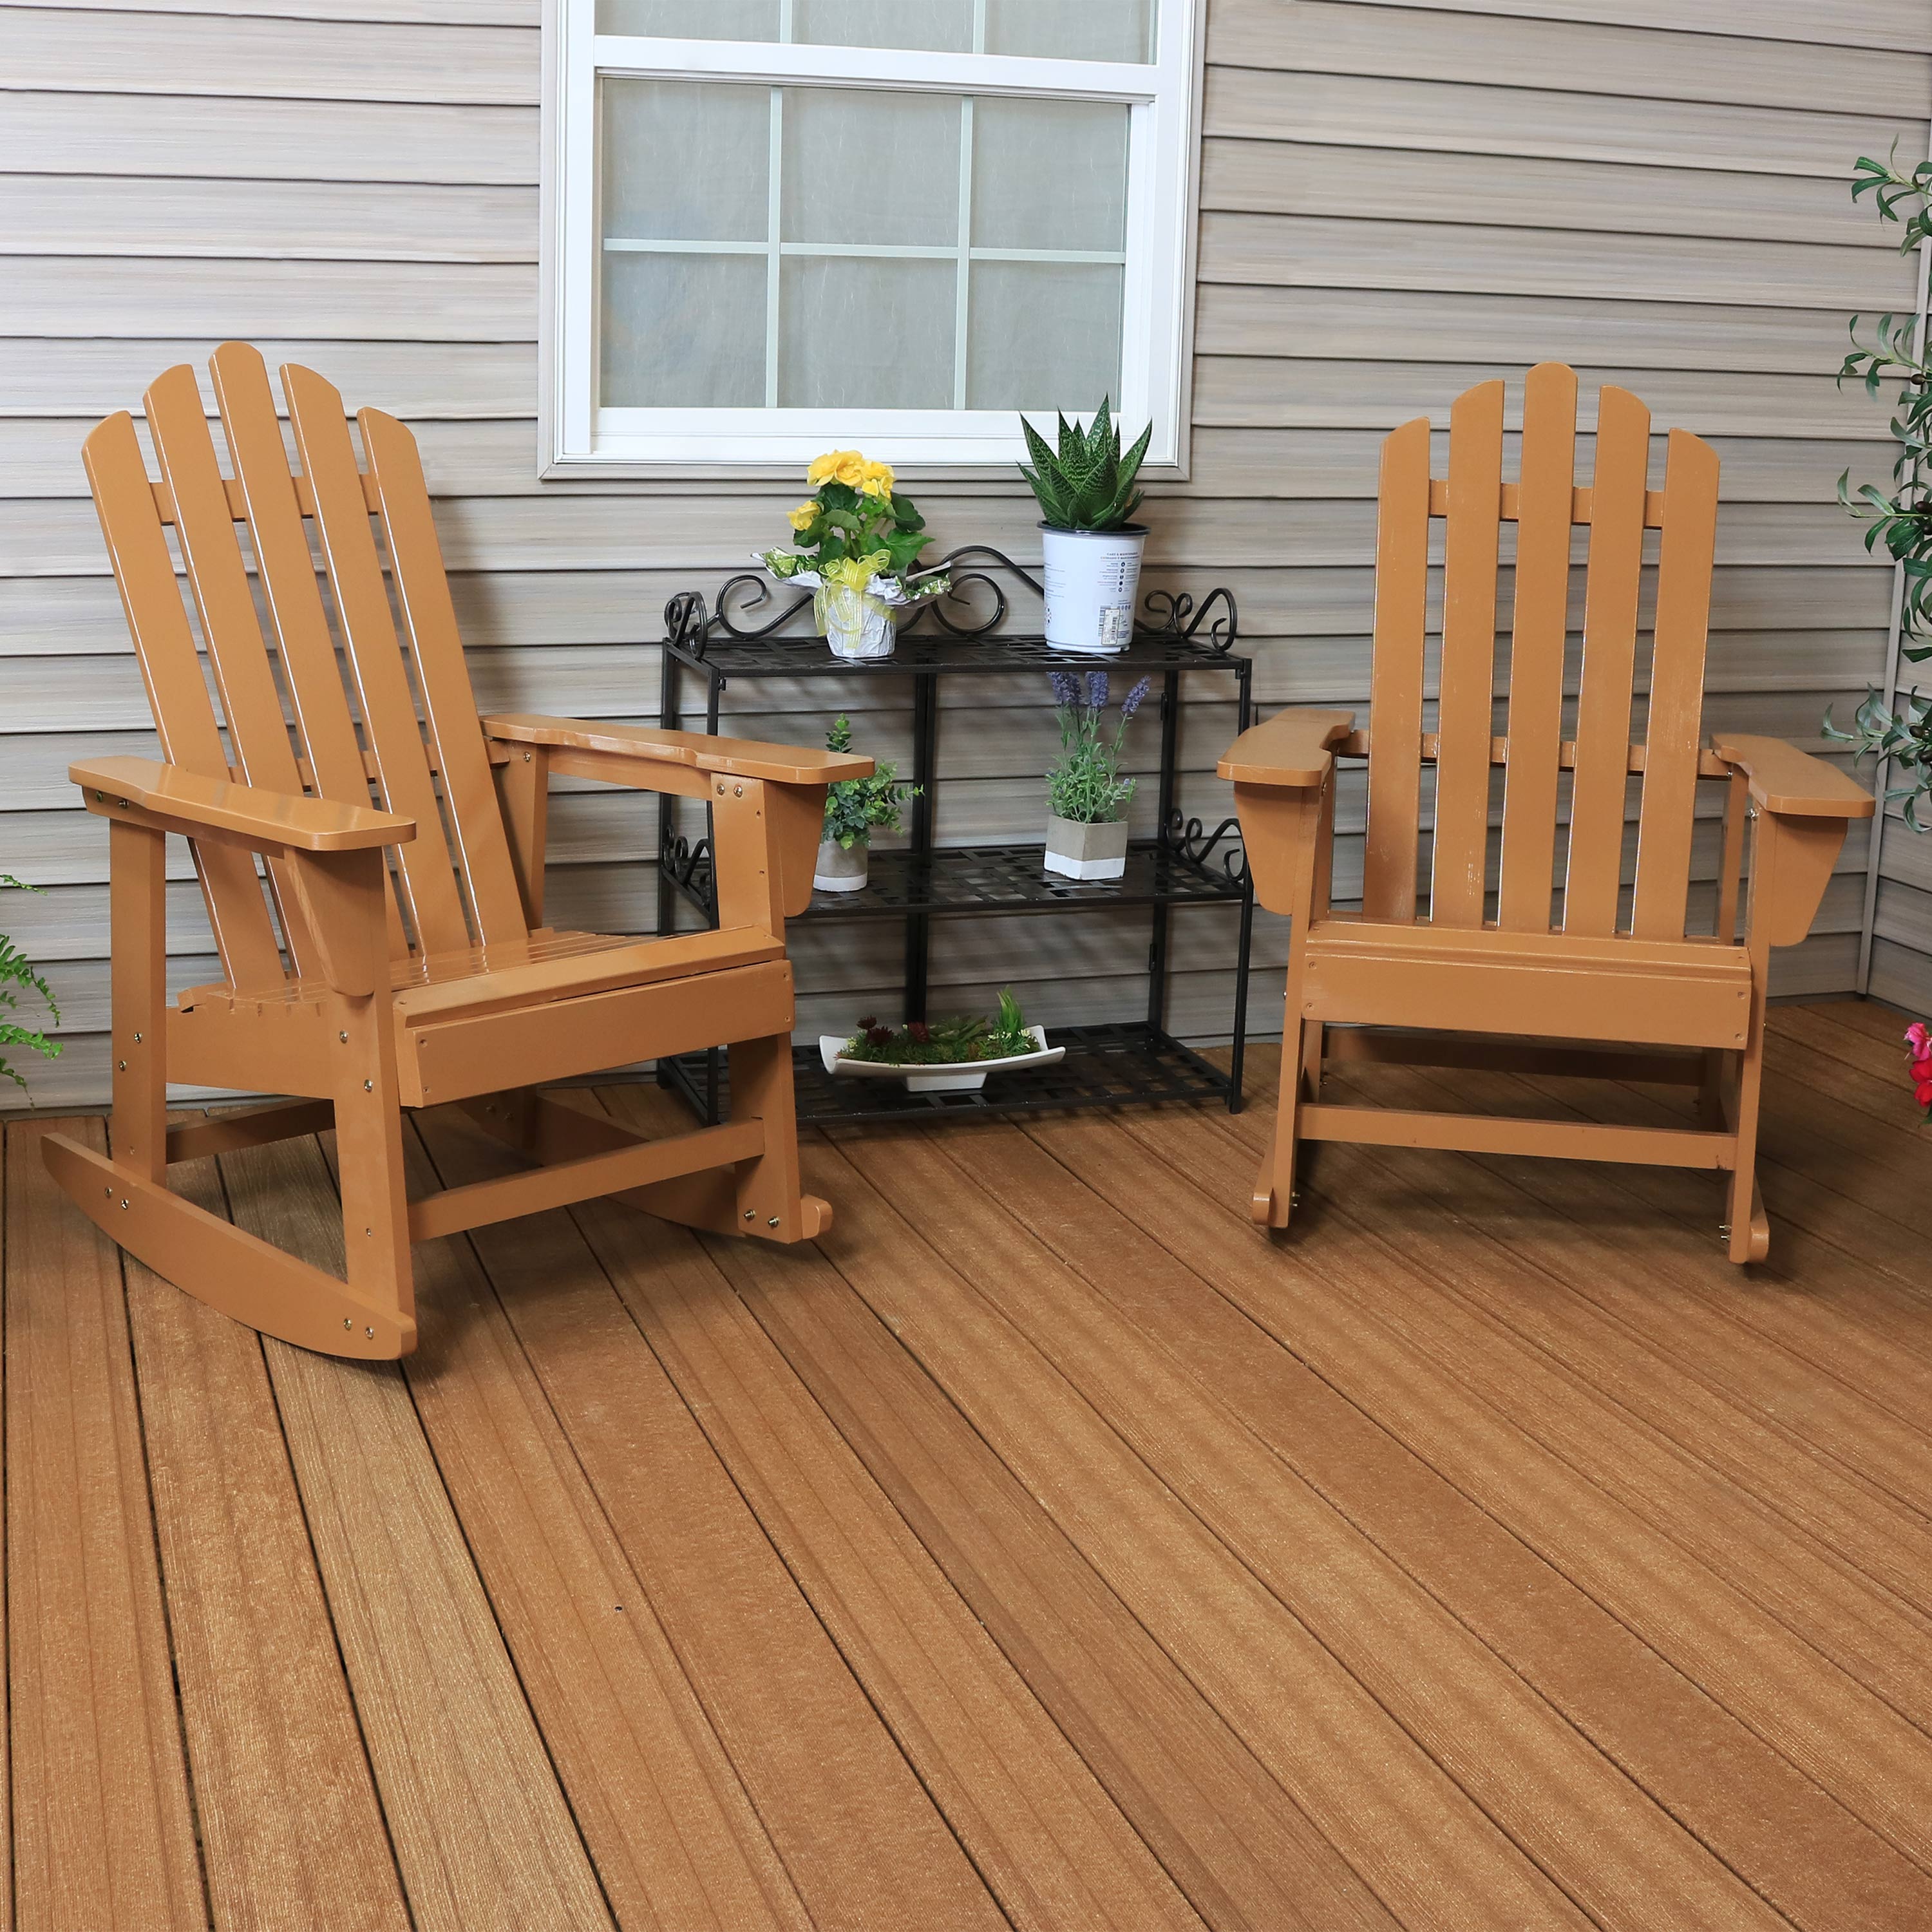 Sunnydaze Outdoor Wooden Adirondack Rocking Chair with Cedar Finish - Set of 2 - image 2 of 8